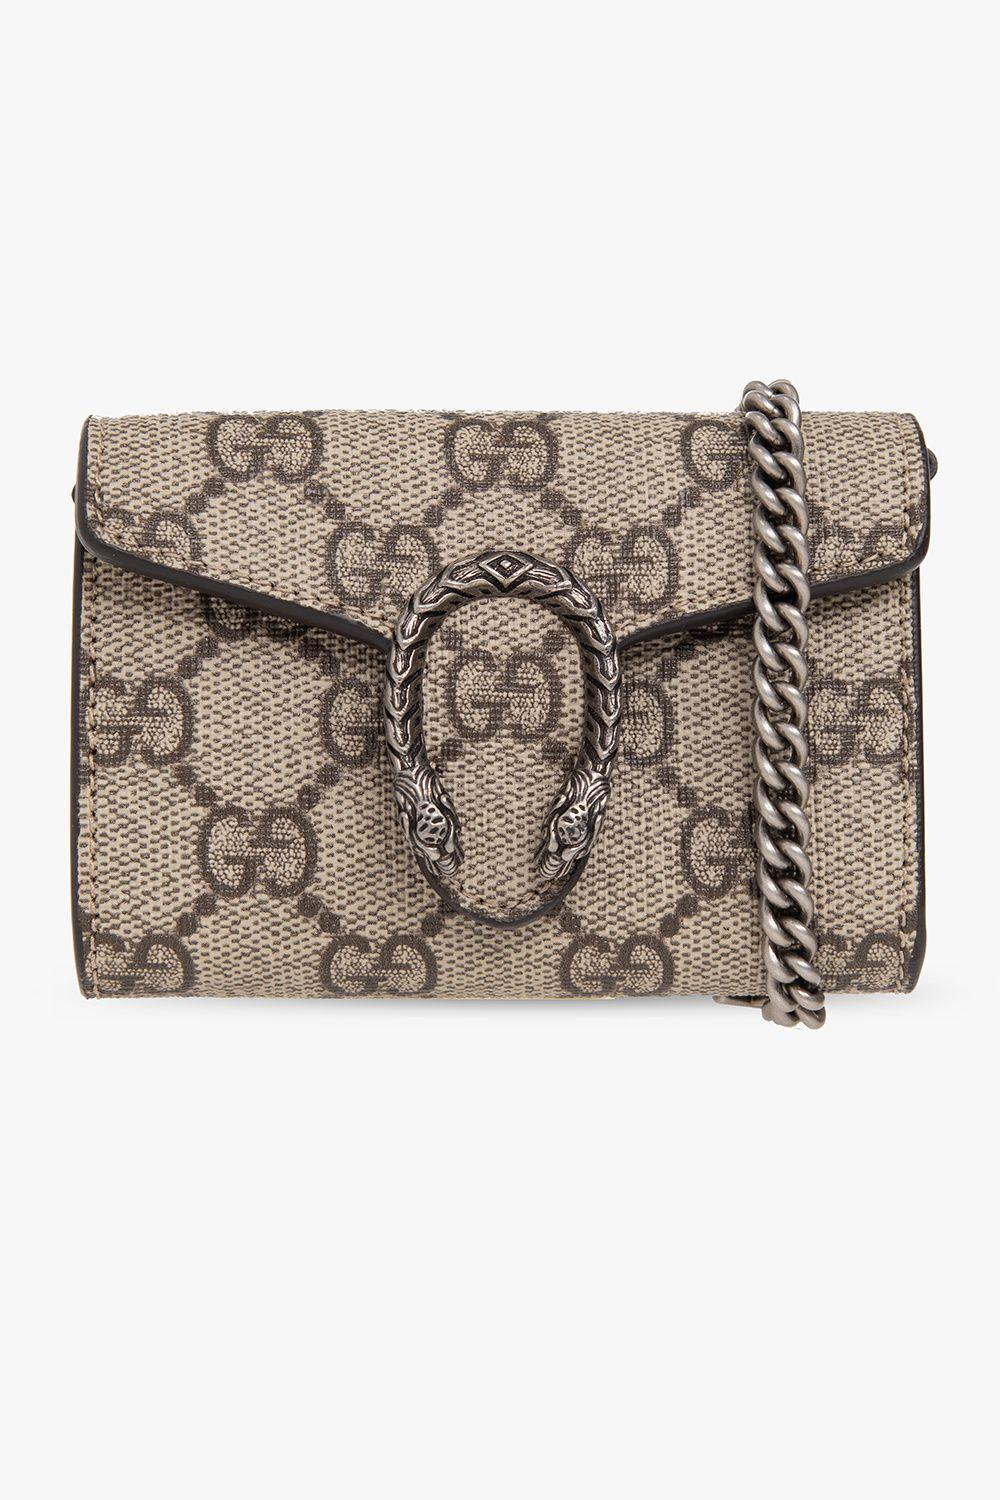 Gucci Beige GG Supreme Coated Canvas Mini Dionysus Wallet-On-Chain